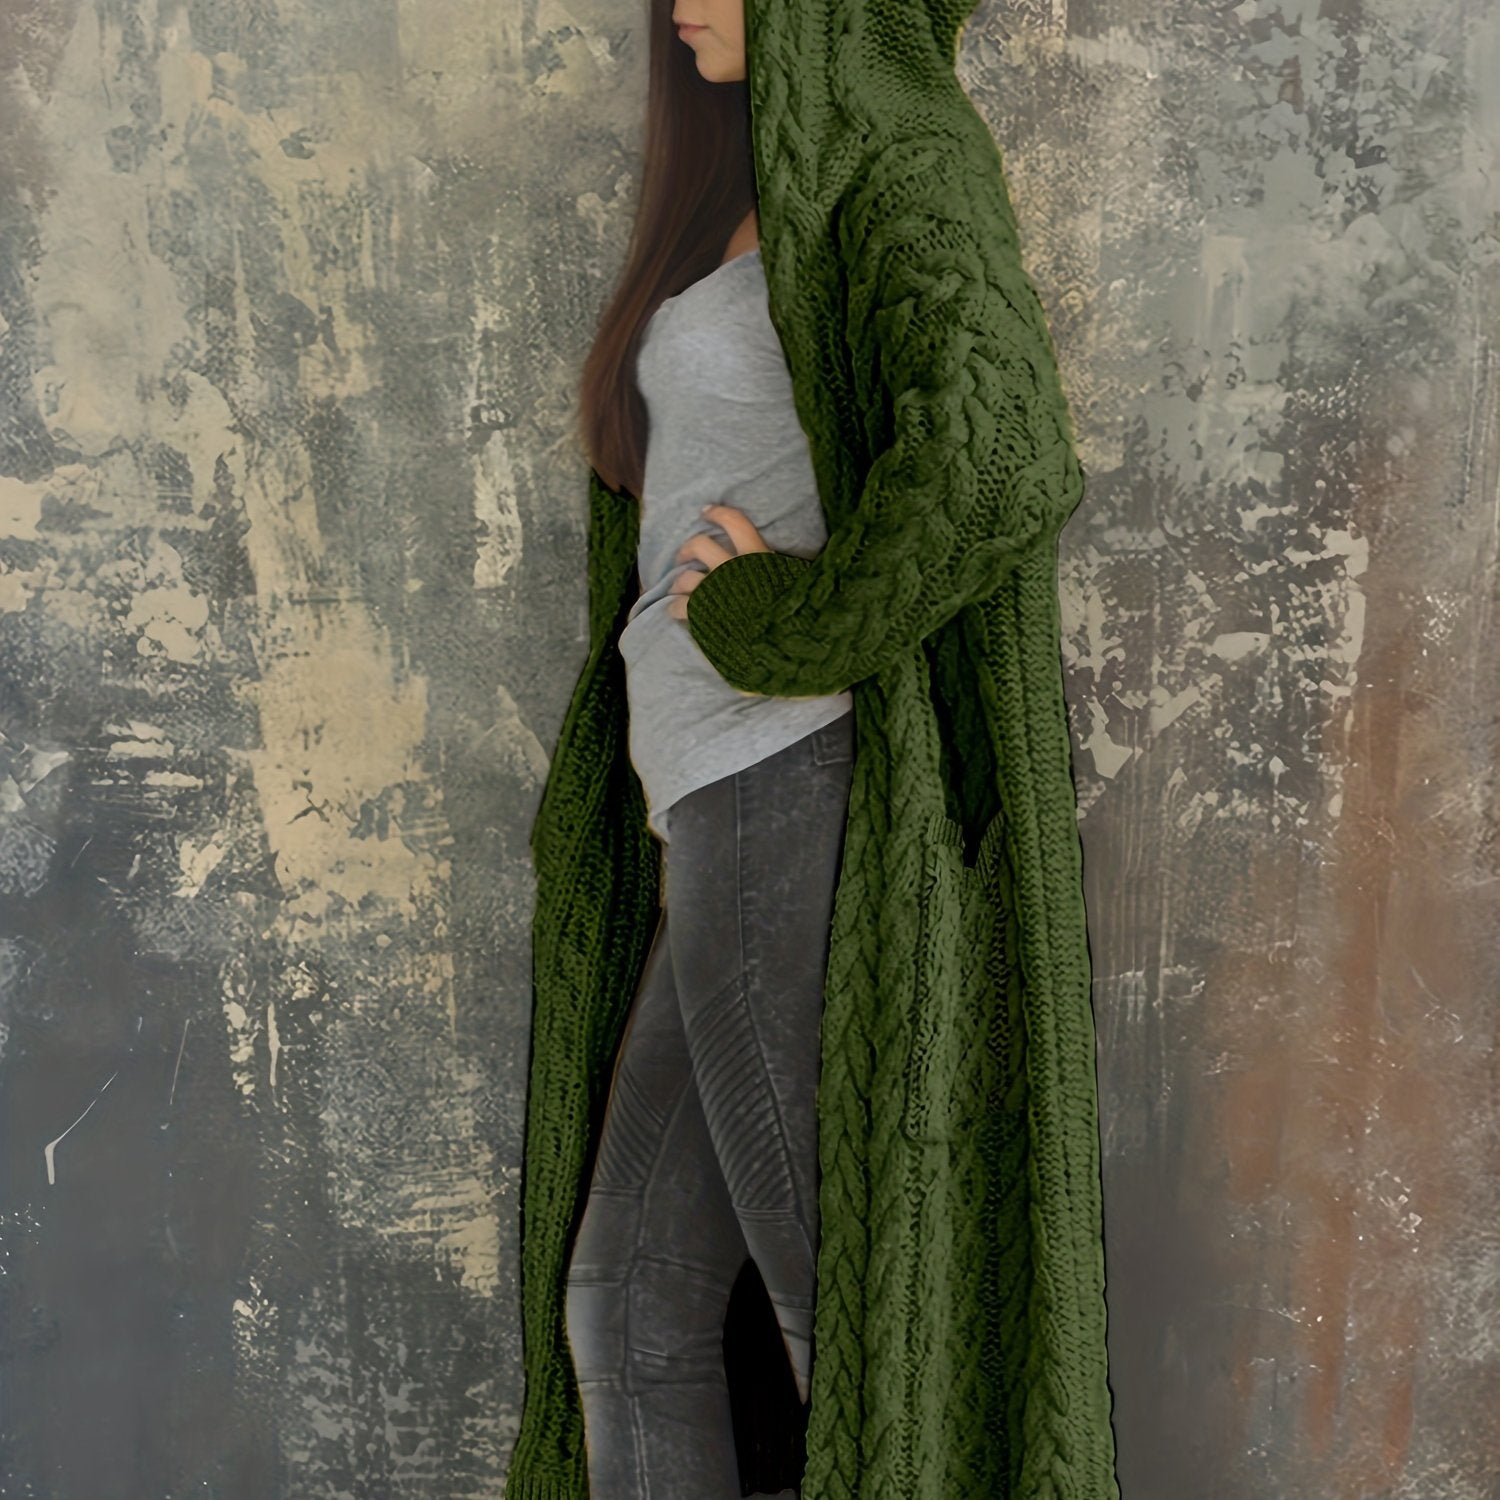 Plus Size Women's Solid Color Hooded Cardigan Coat, Casual Knitted Sweater Coat Green